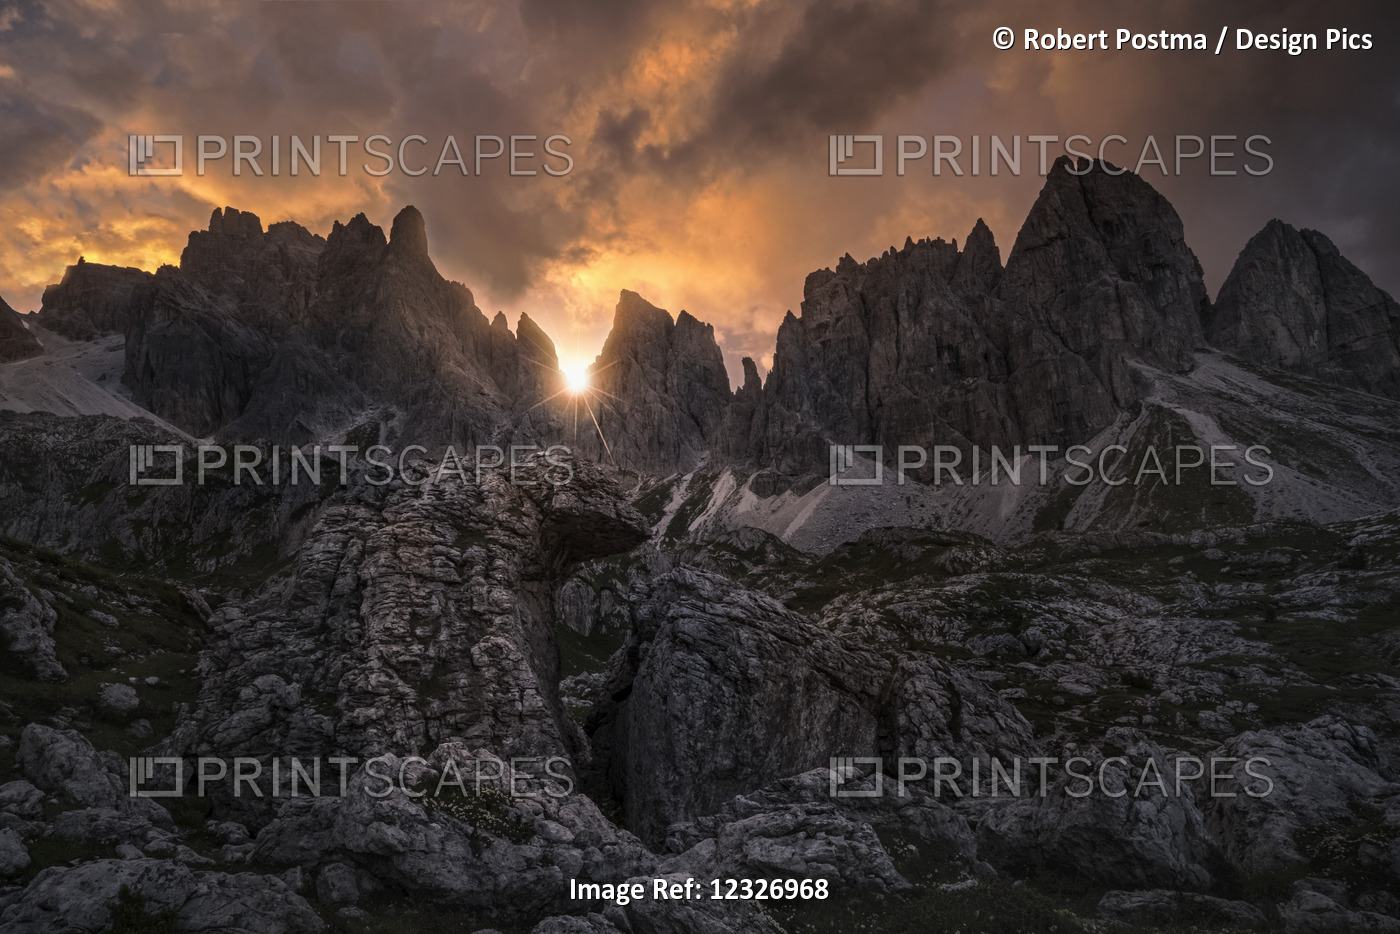 A Sunstar Shines Through The Dolomite Mountains At Sunset Near Cortina; Italy